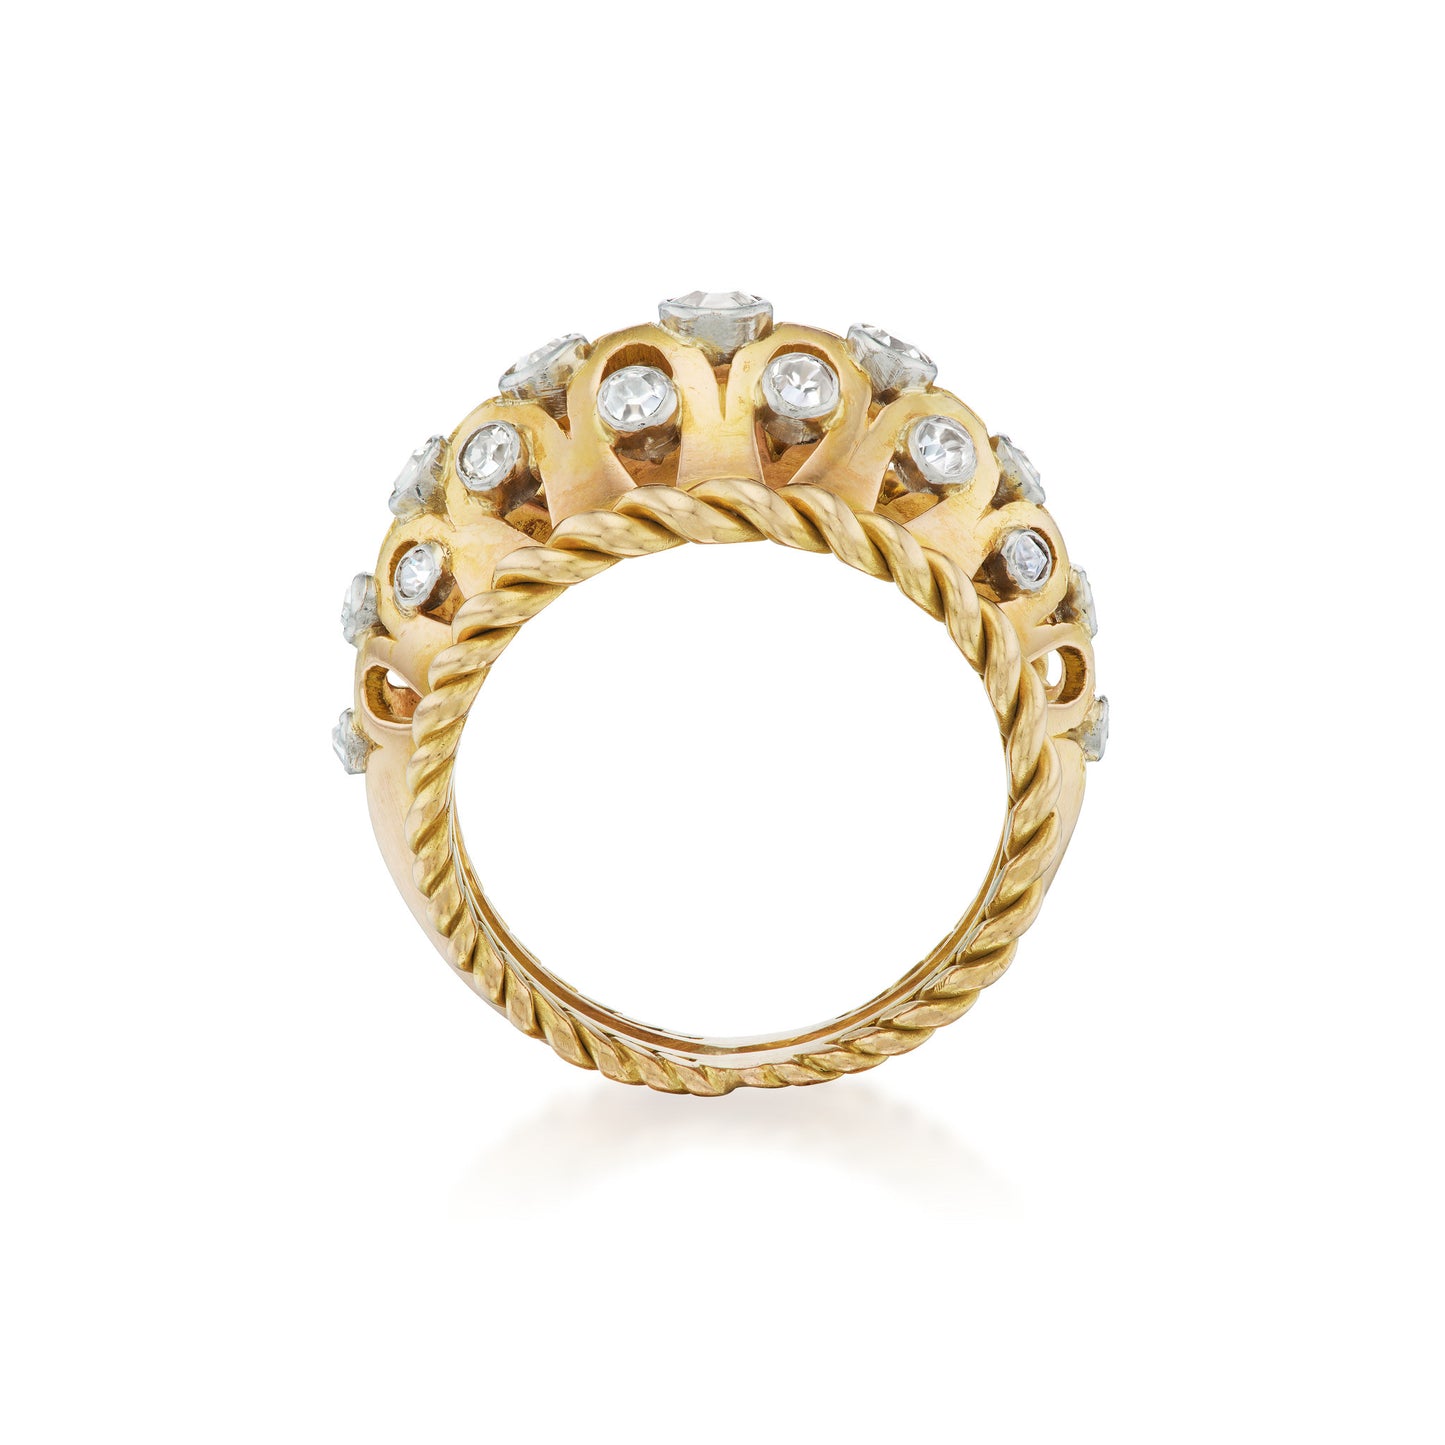 French 1960s 18KT Yellow Gold Diamond Ring profile